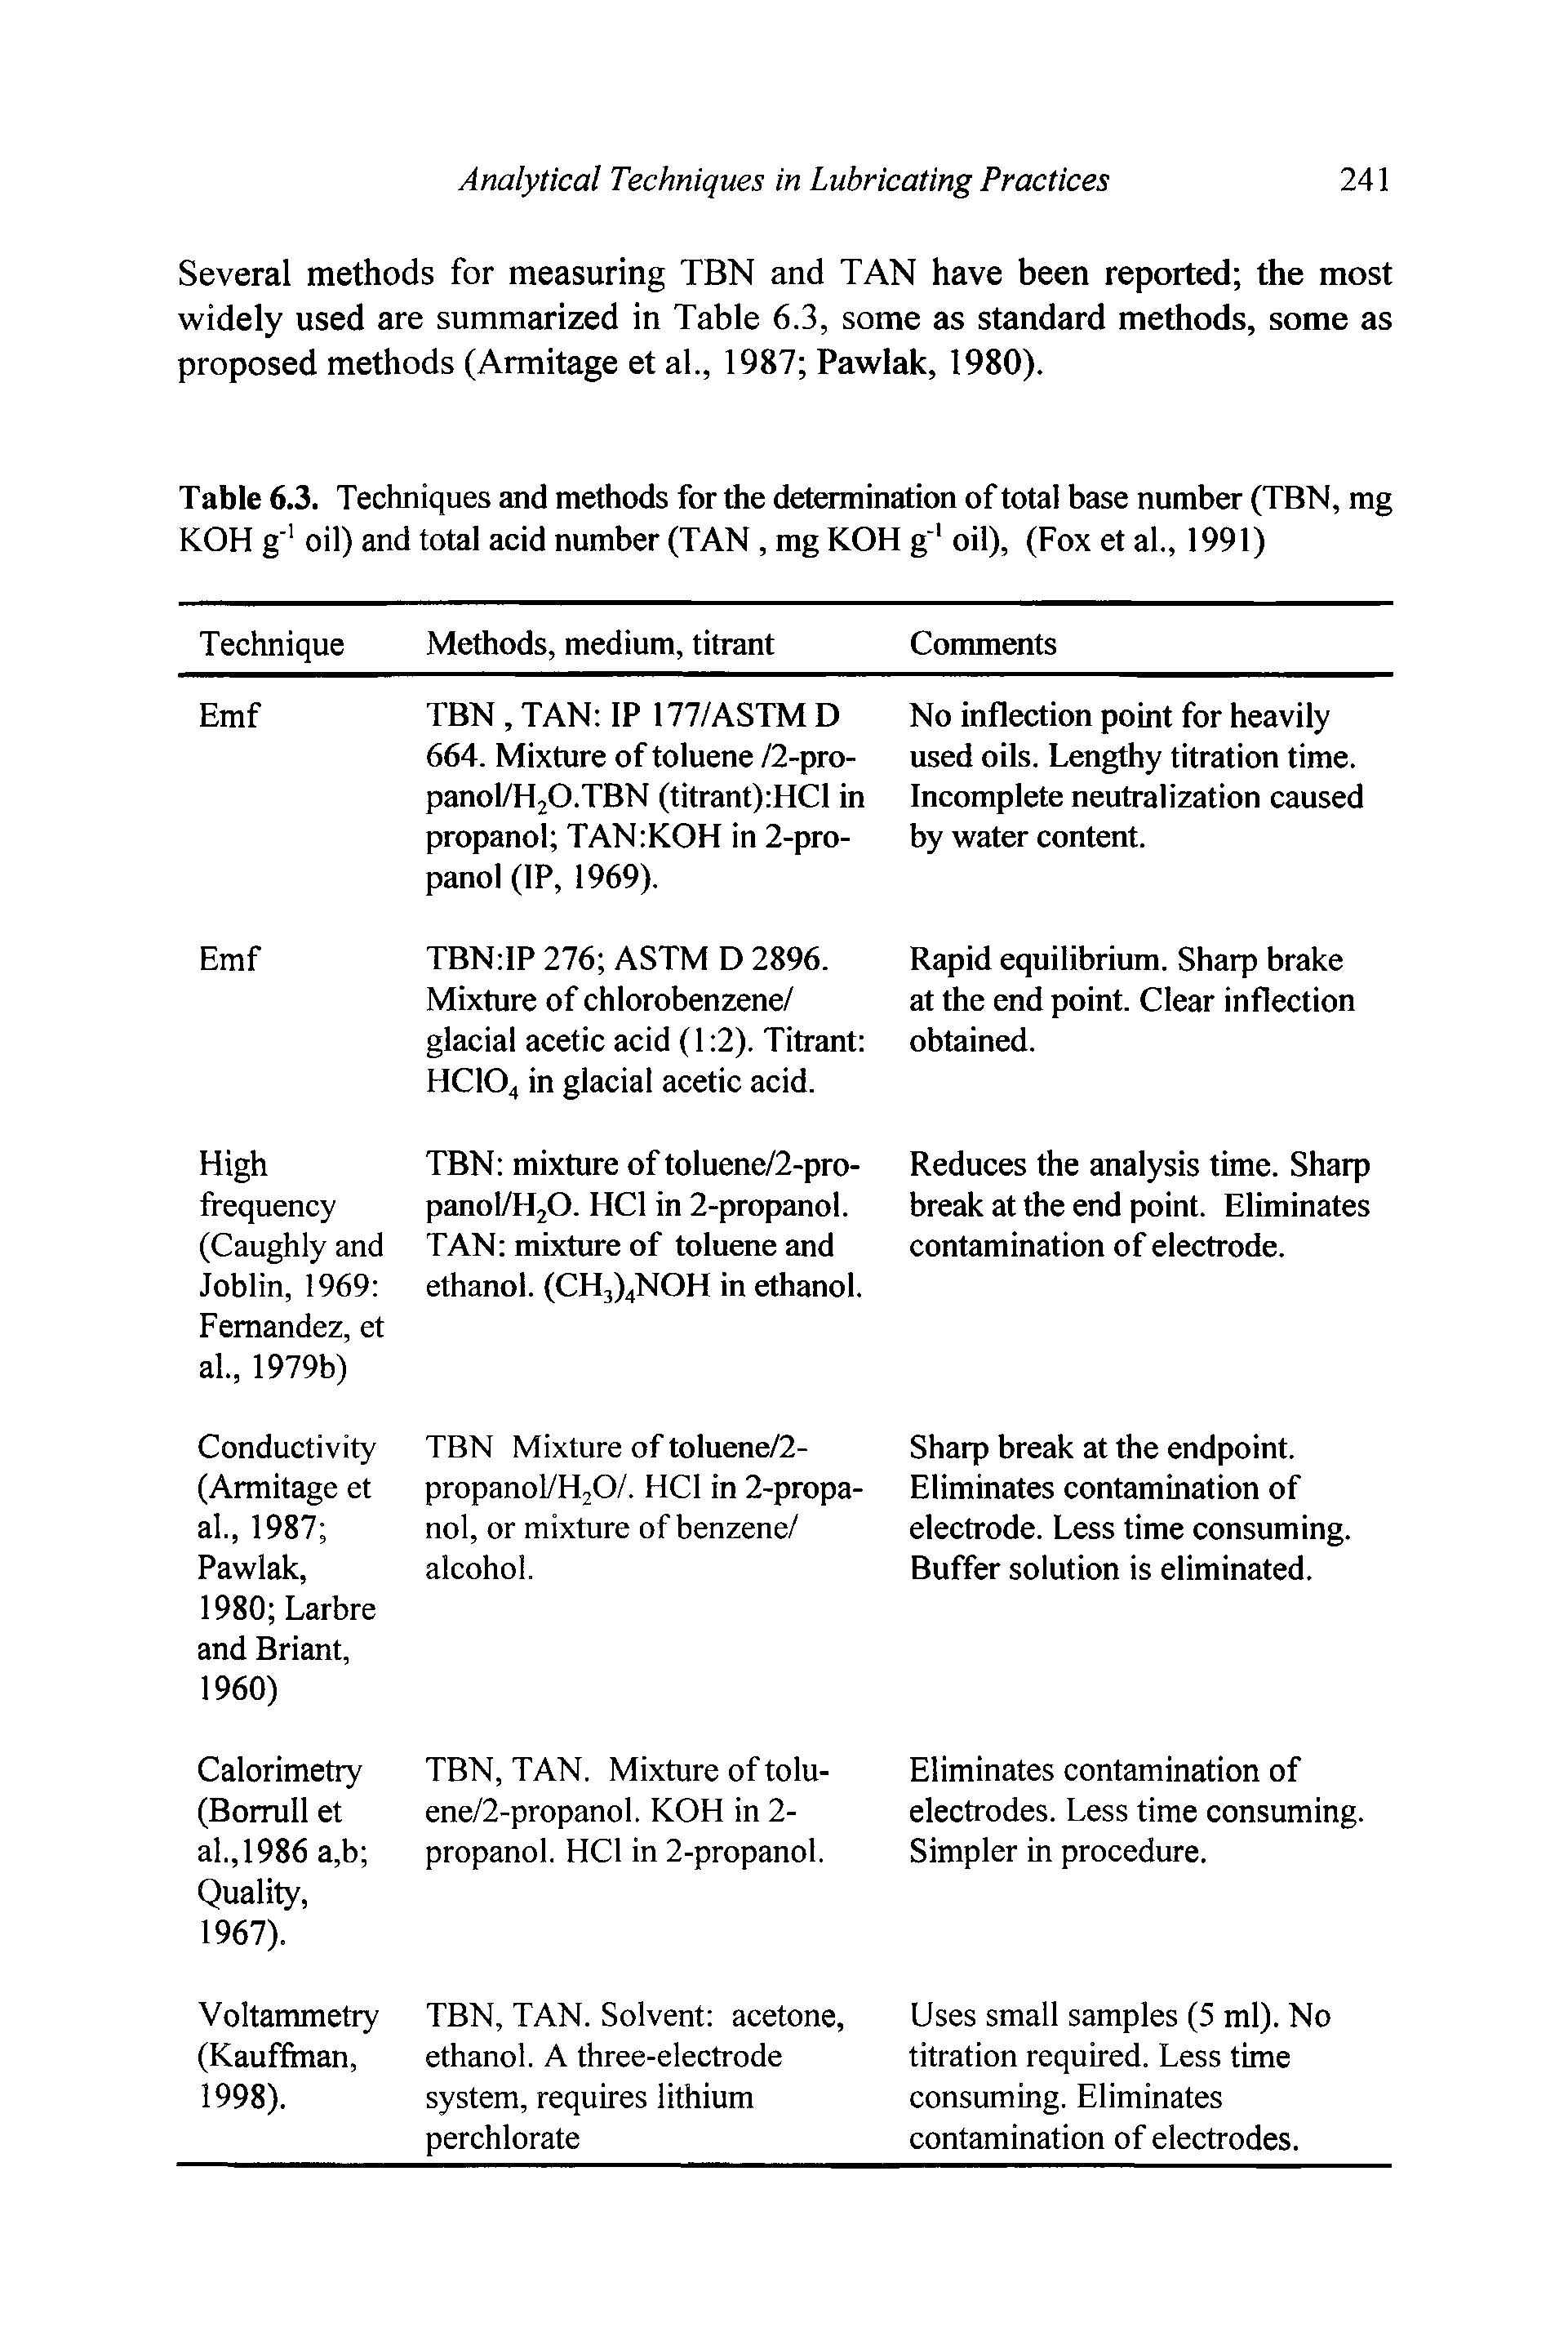 Table 6.3. Techniques and methods for the determination of total base number (TBN, mg KOH g 1 oil) and total acid number (TAN, mg KOH g 1 oil), (Fox et al., 1991)...